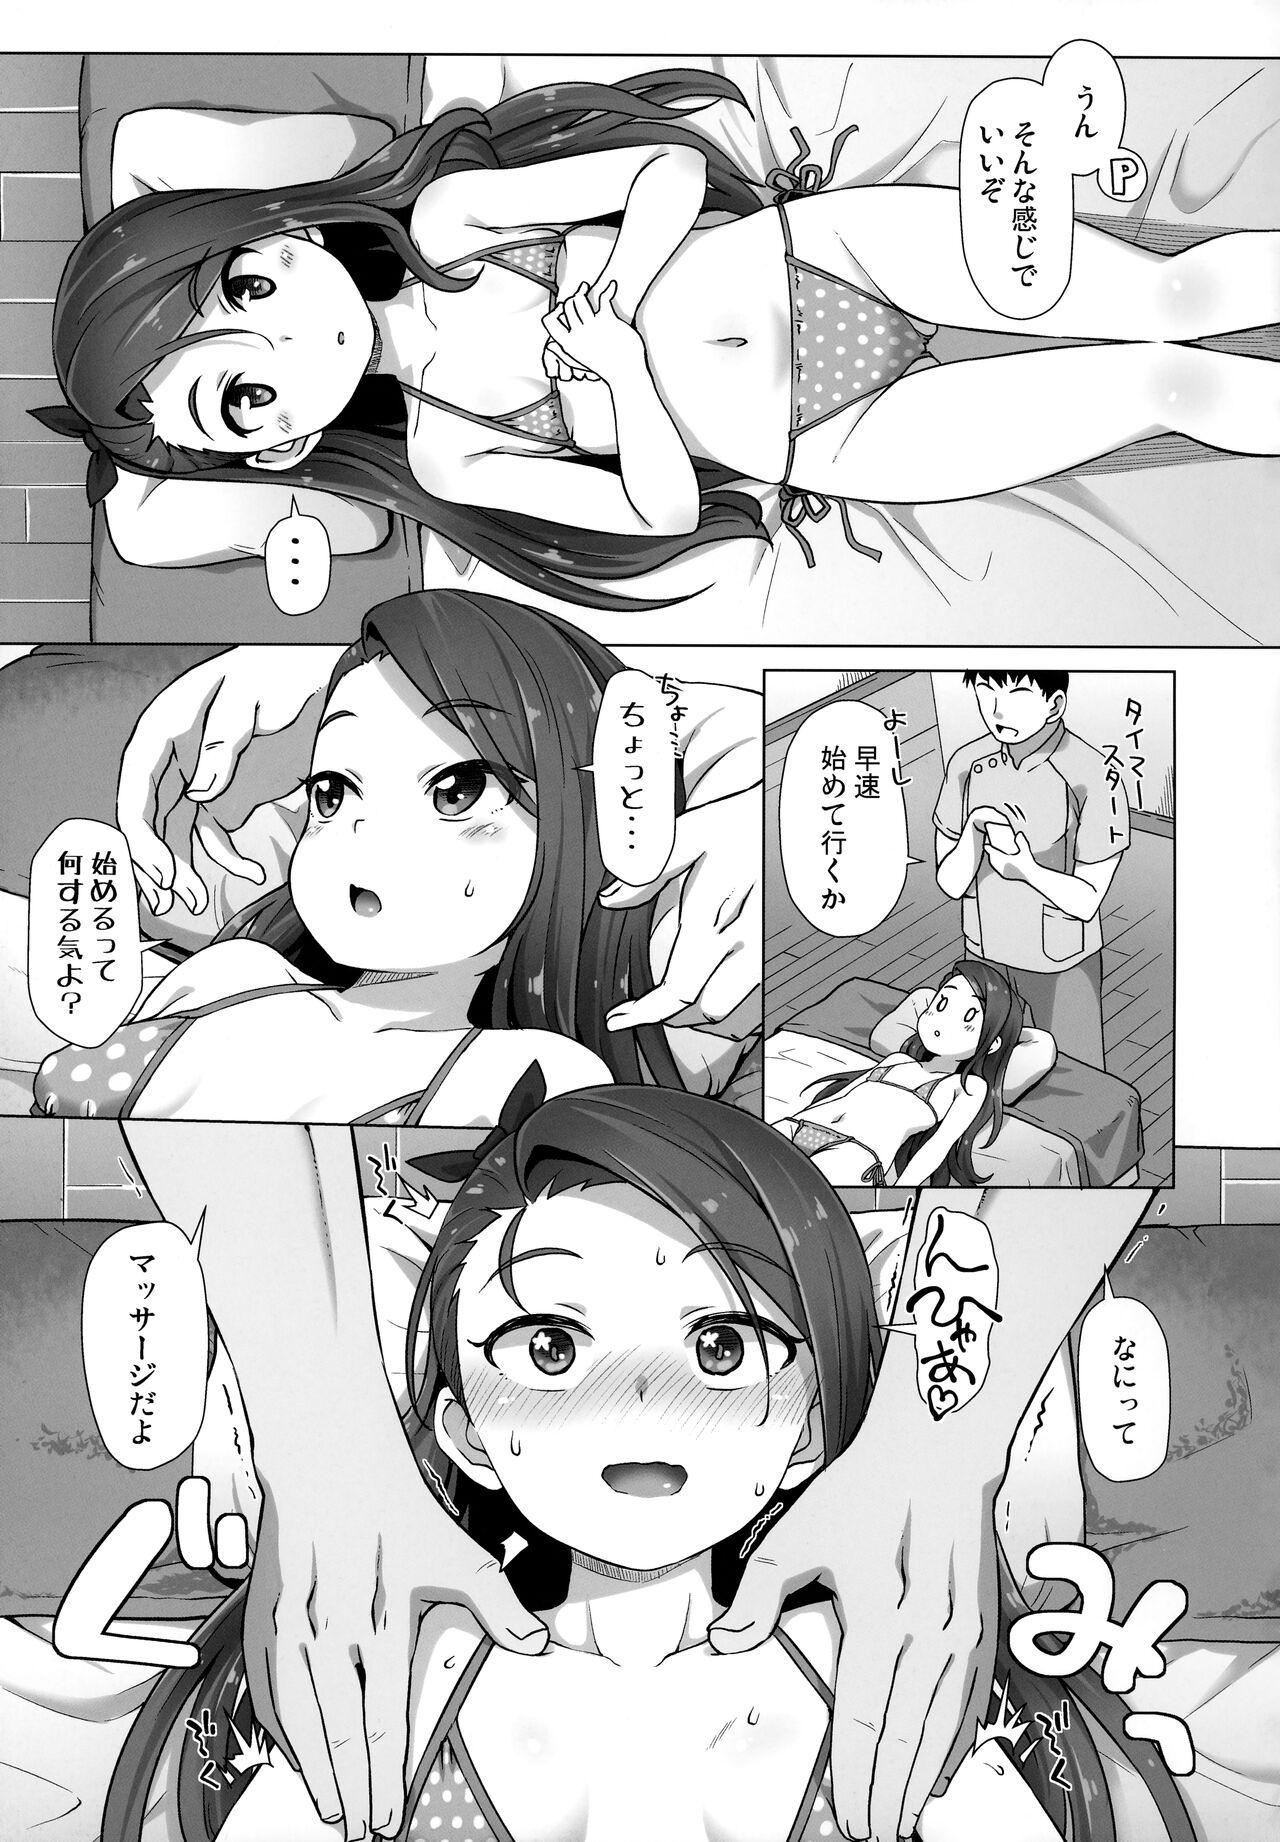 Guys IORIX BODY CARE - The idolmaster Panty - Page 4